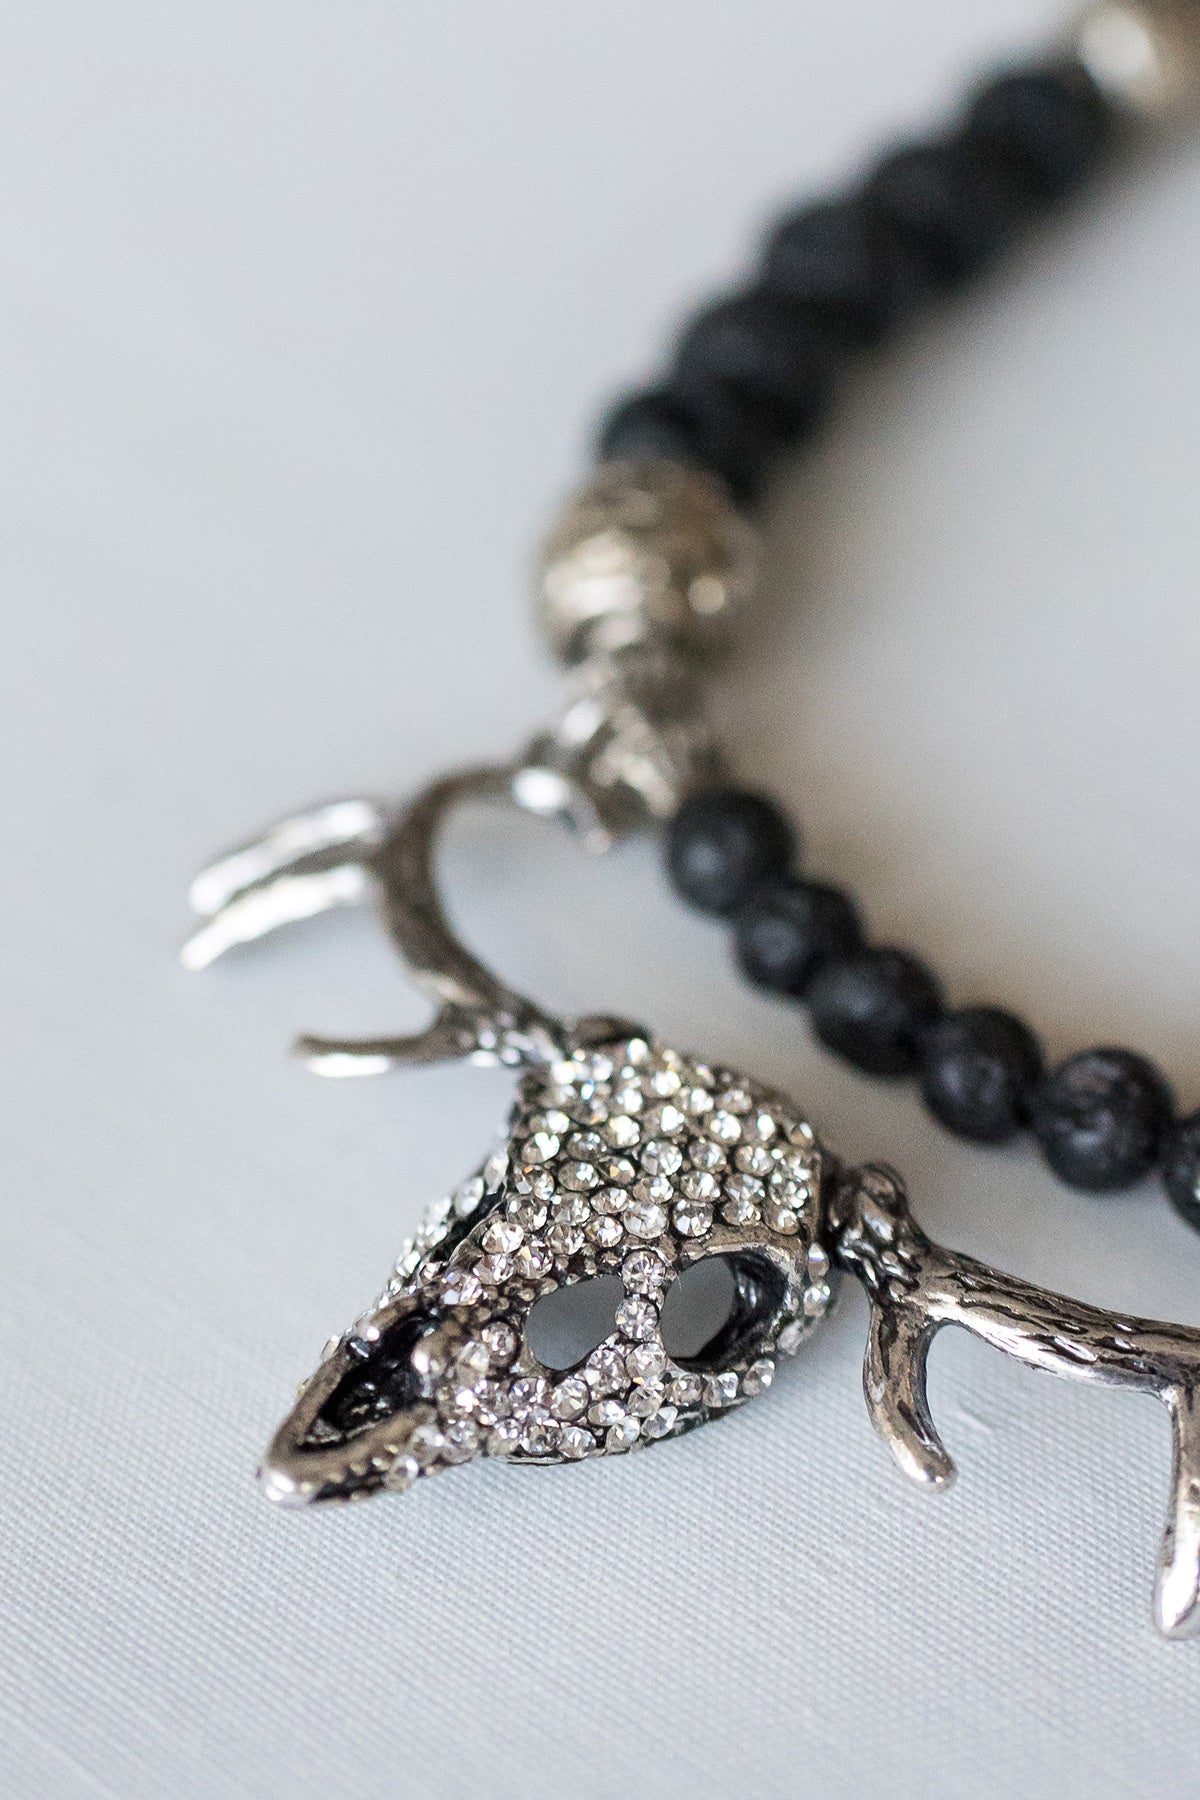 Lava Rock Necklace with Antique Silver & Rhinestone Antelope Skull